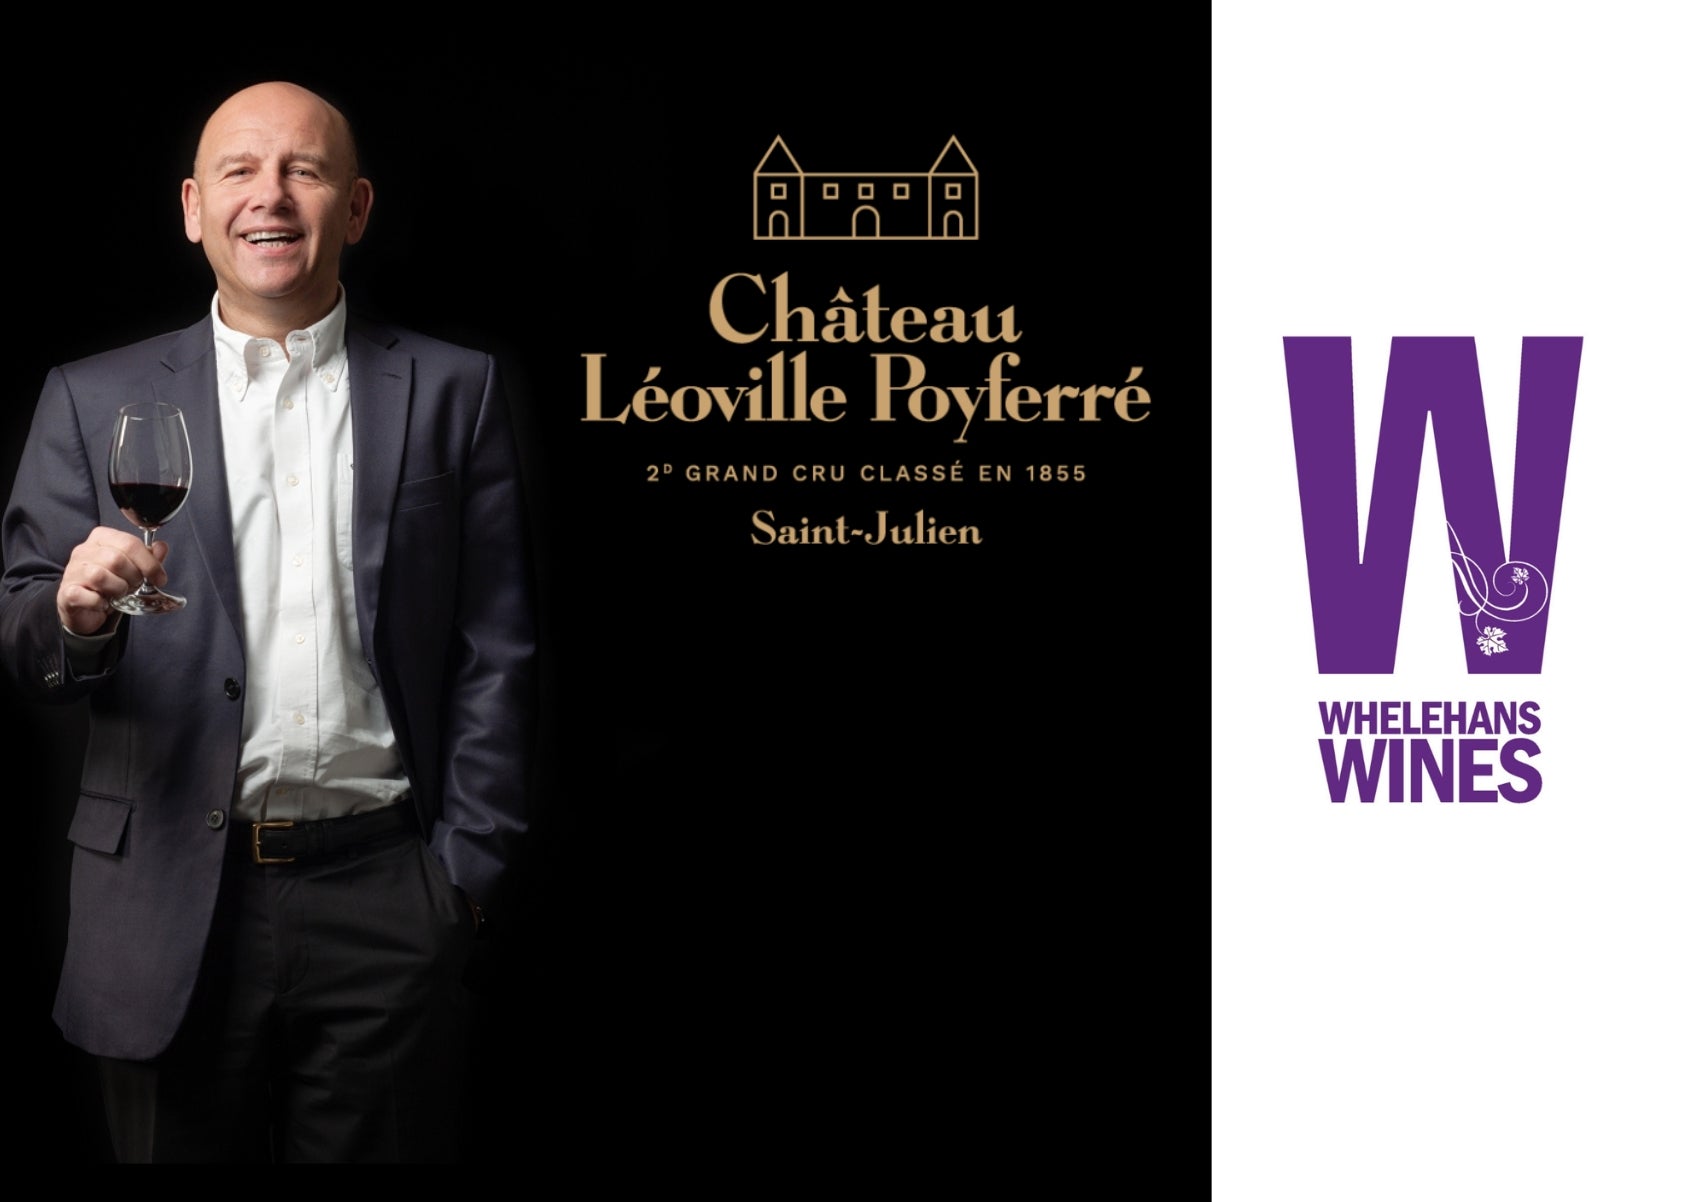 Olivier Cuvelier & The Fascinating Story Behind Château Leoville Poyferré